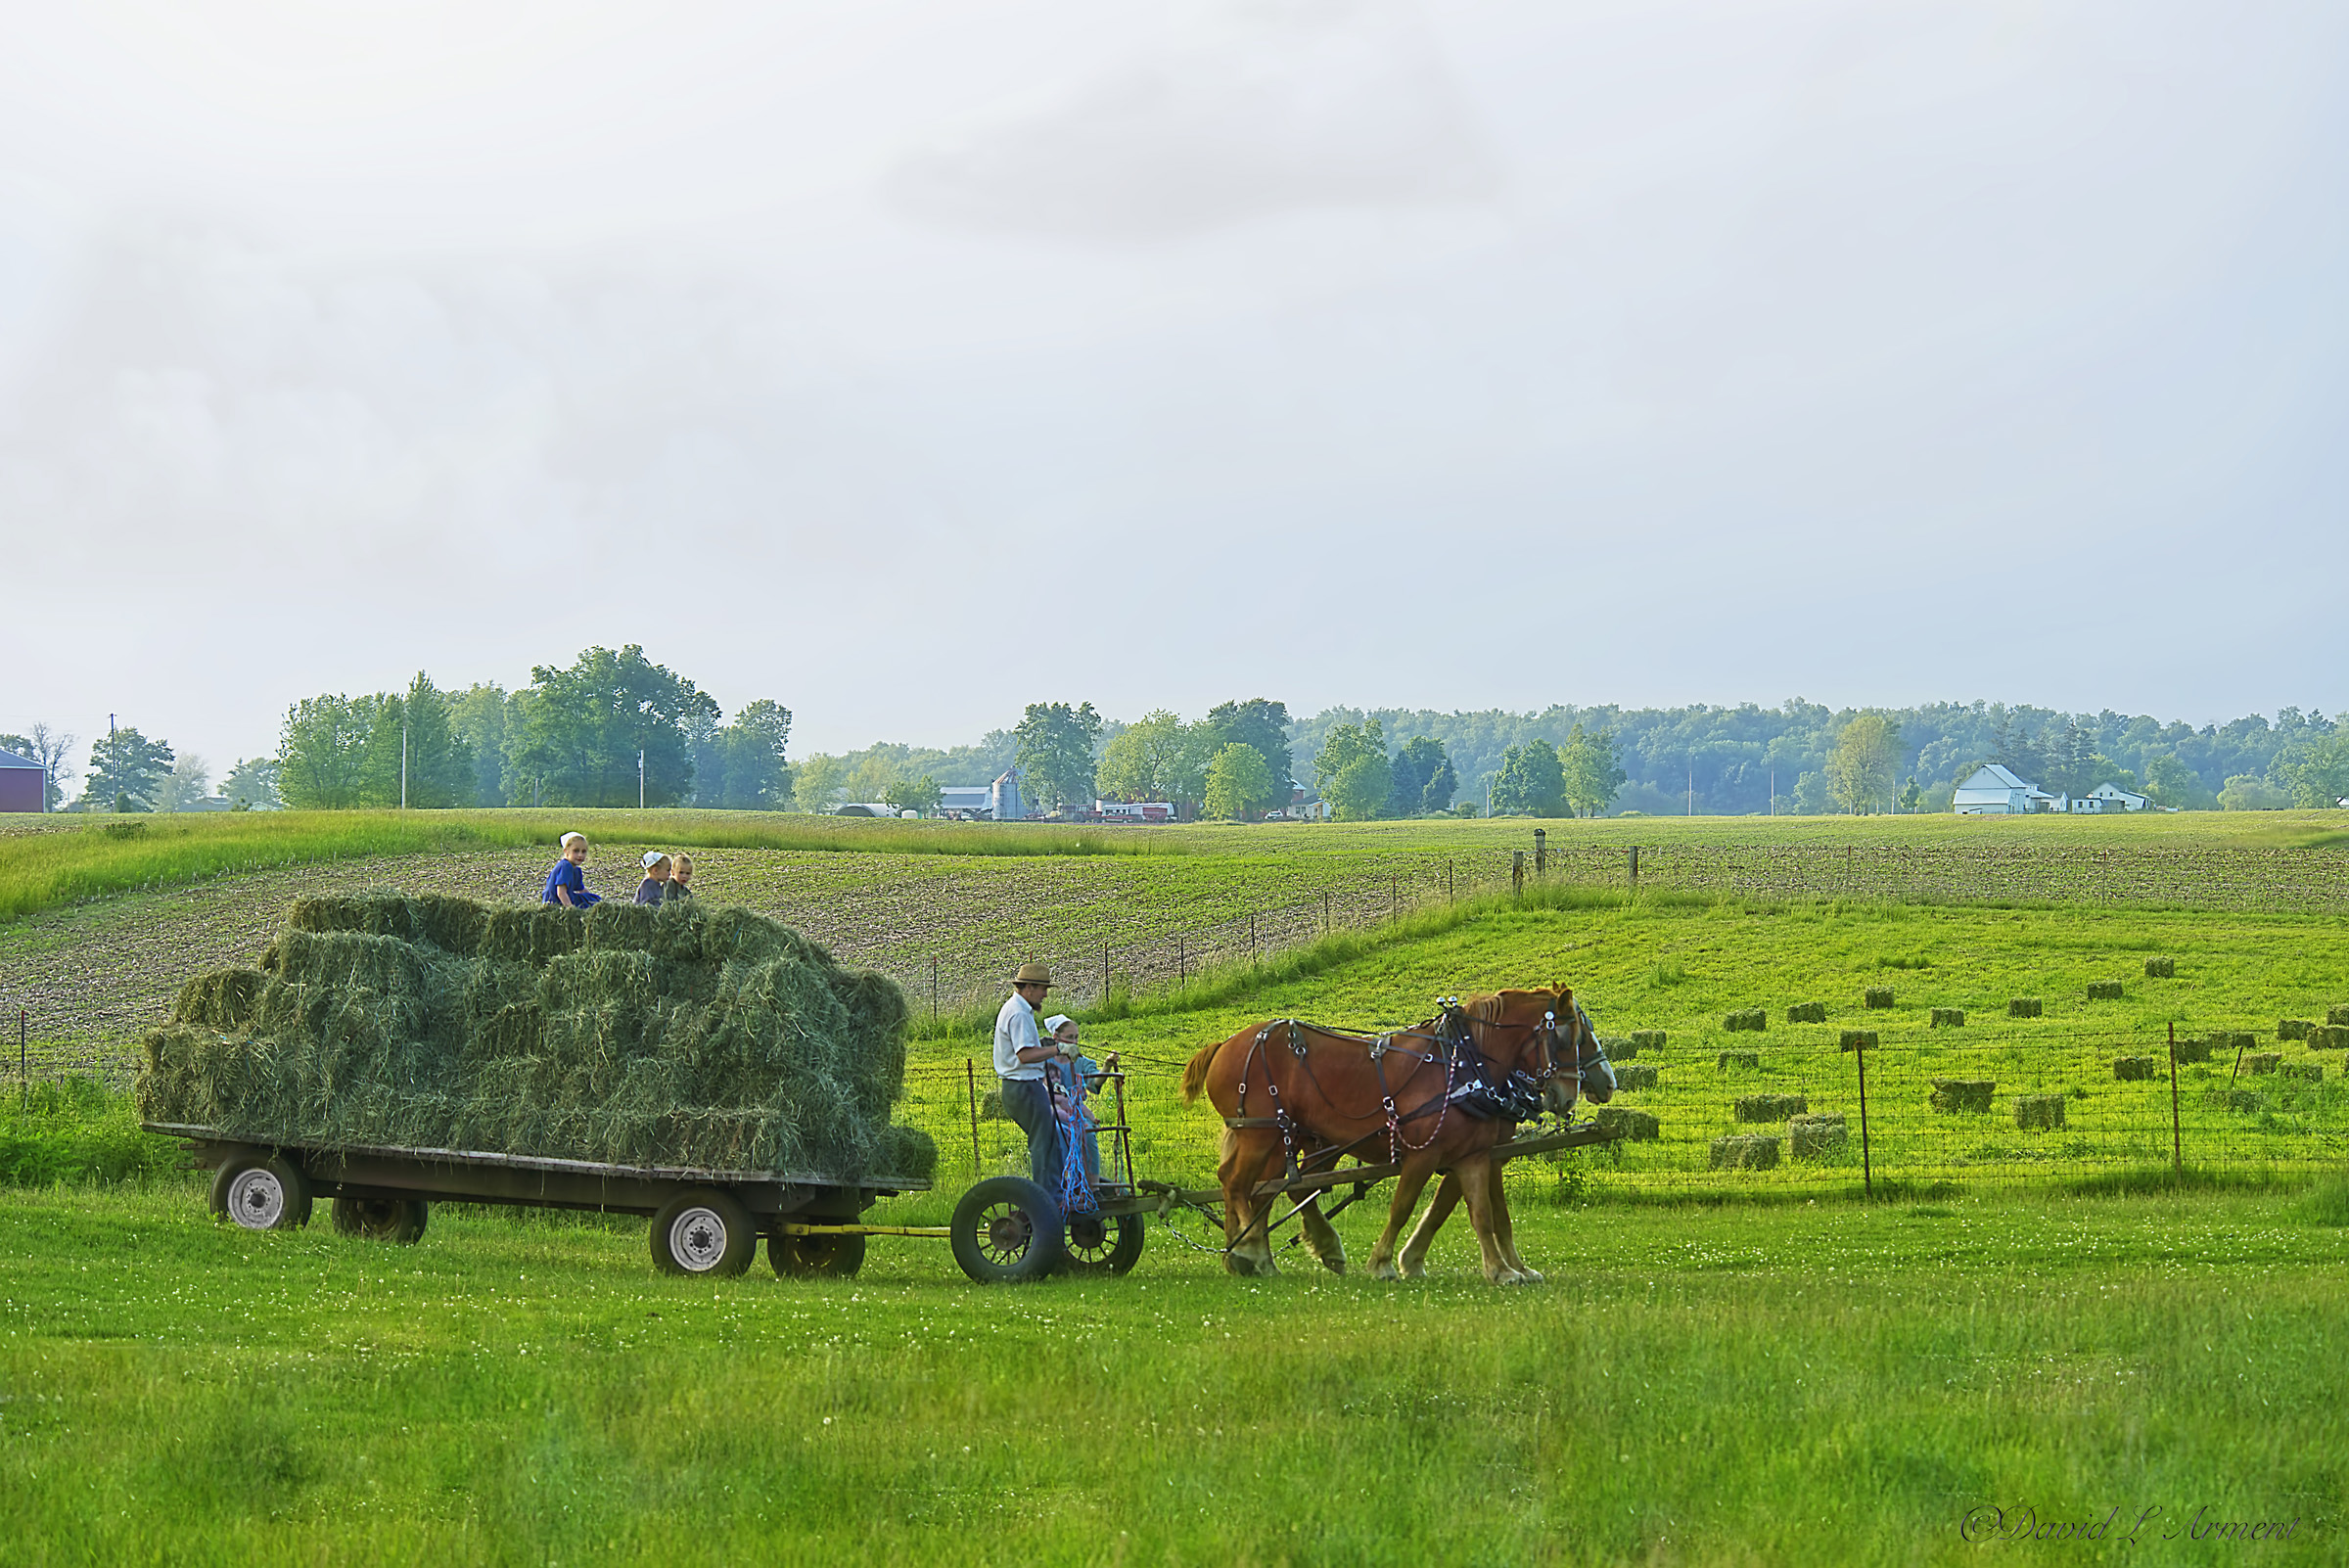 Itinerary for an Amazing Day in Amish Country, Shipshewana, Indiana